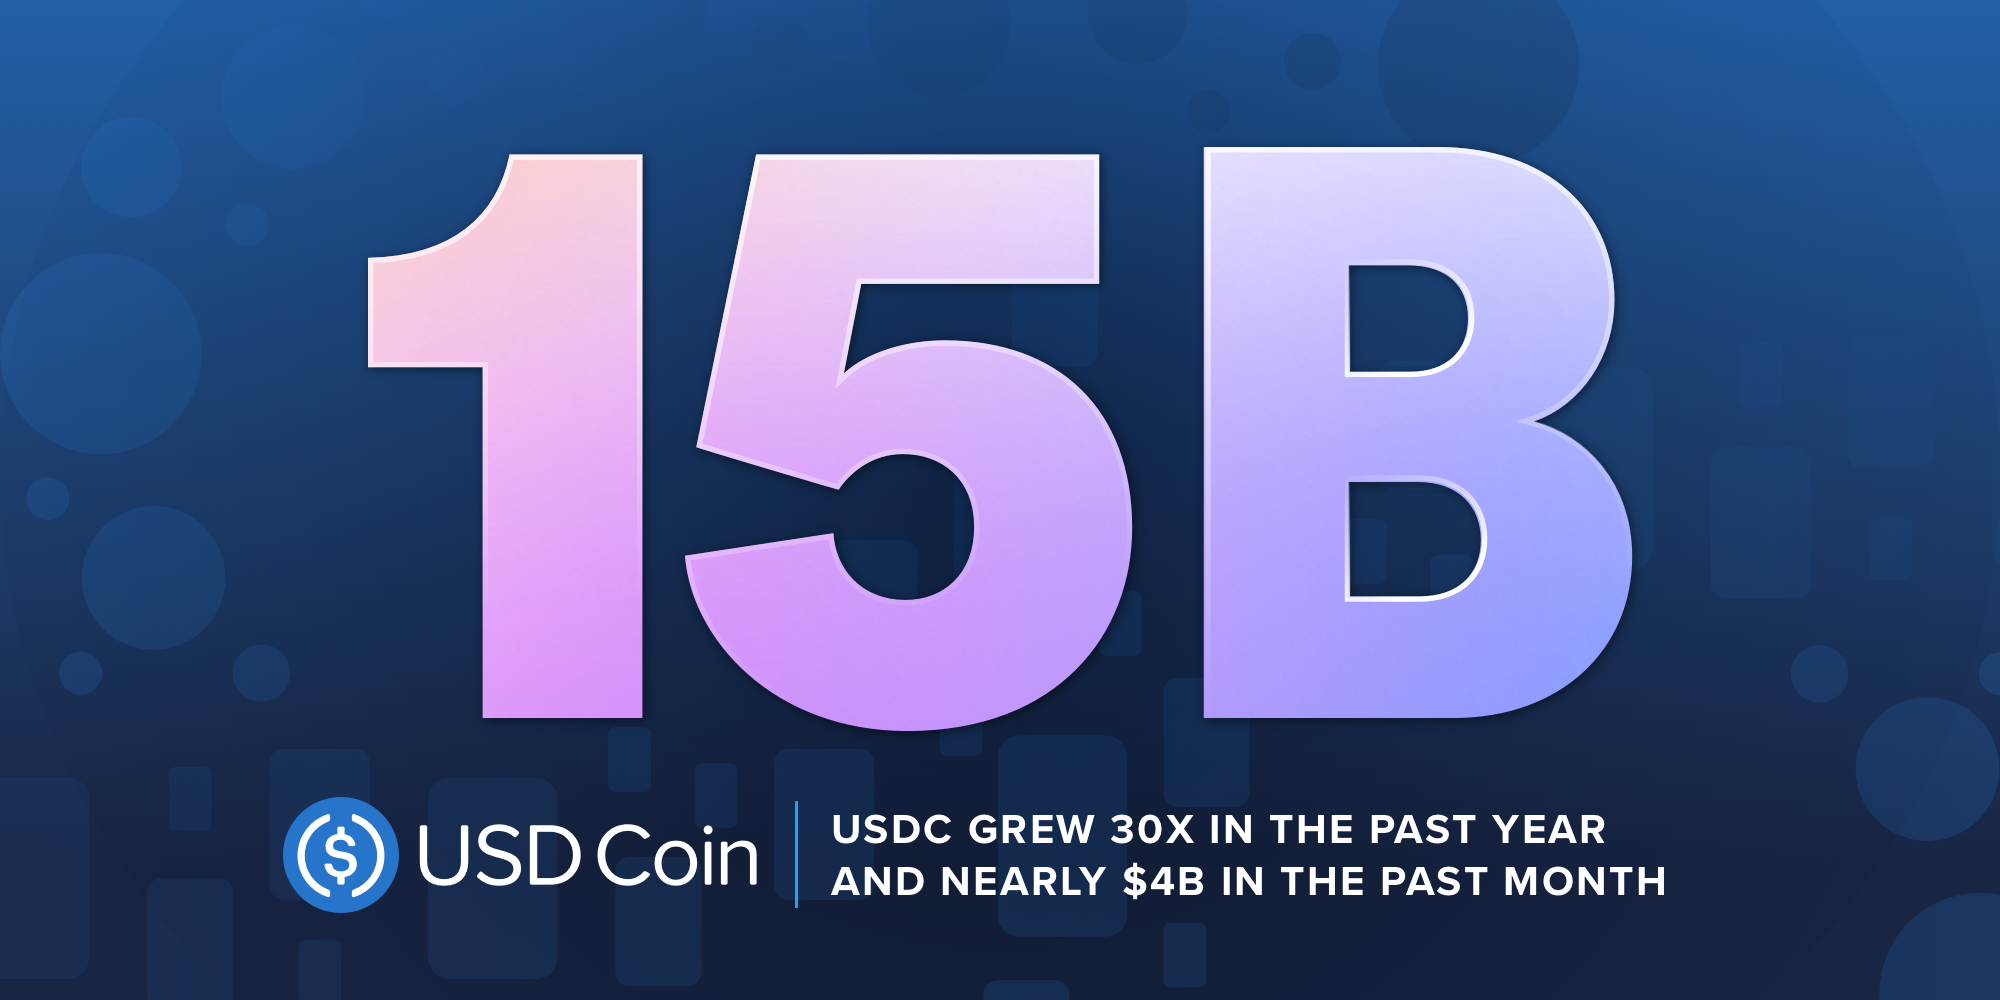 US Dollar Backed Stablecoin, USDC, passes $15 billion in circulation